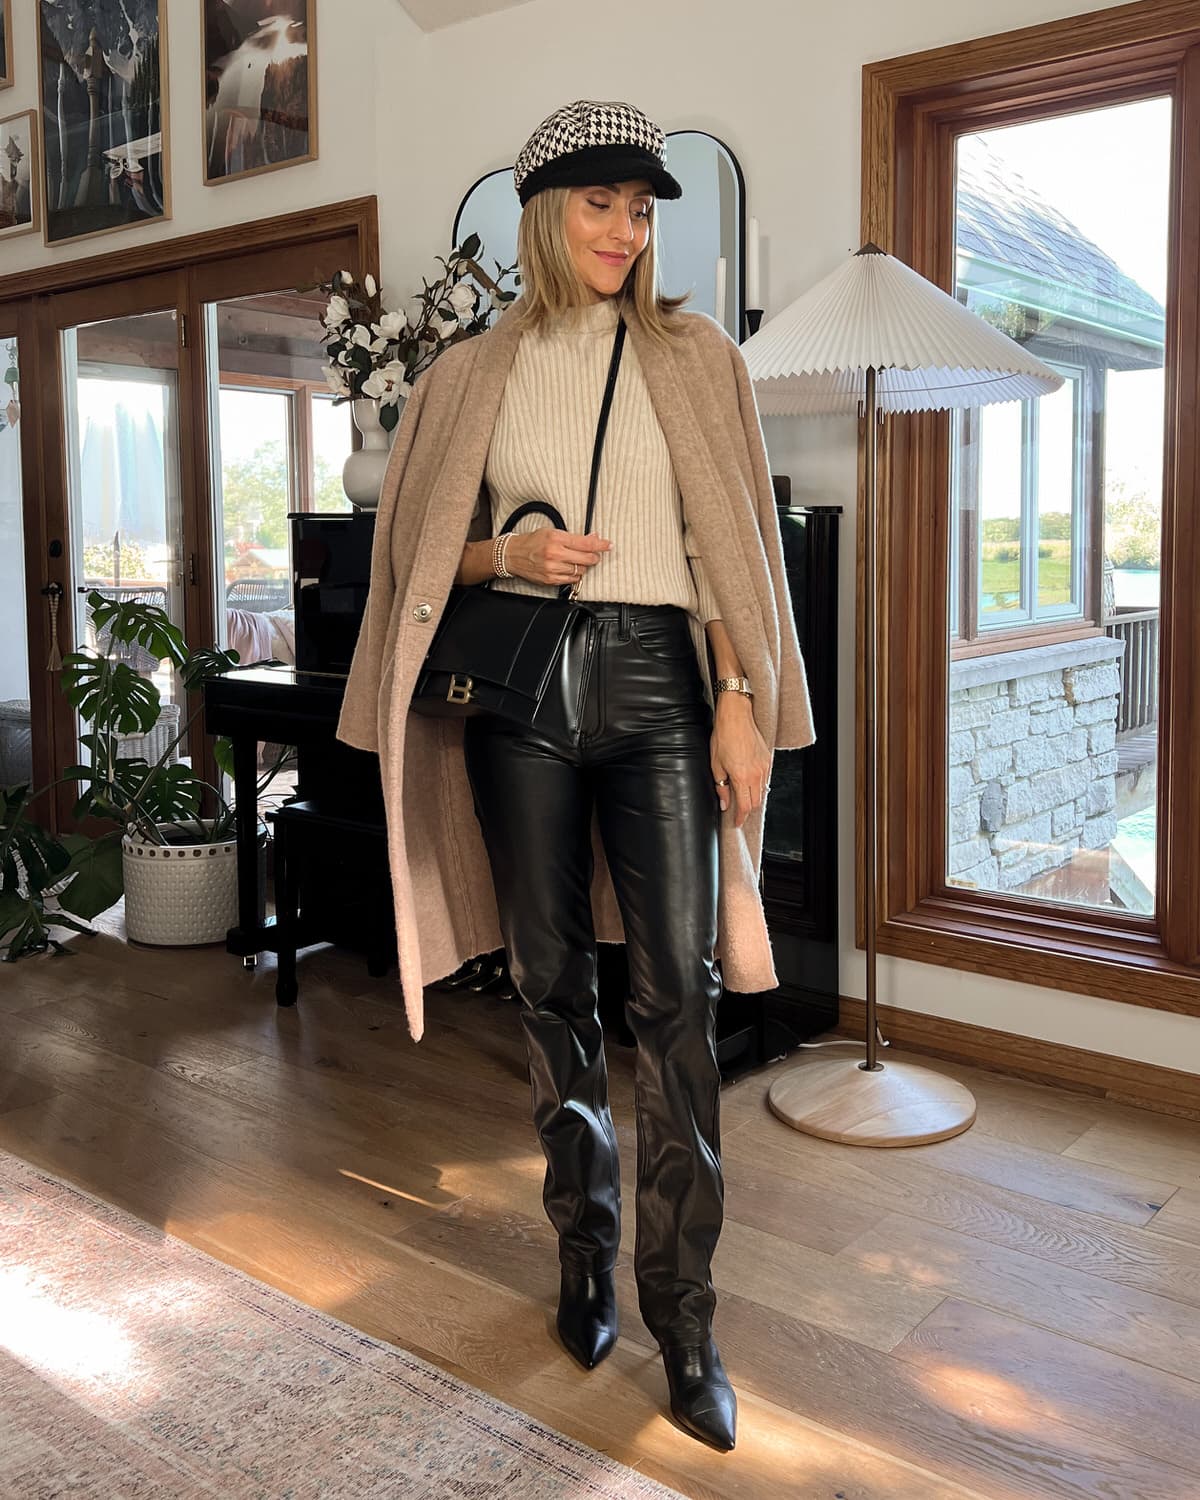 Karina wears leather pants with Vince sweater and cardi coat